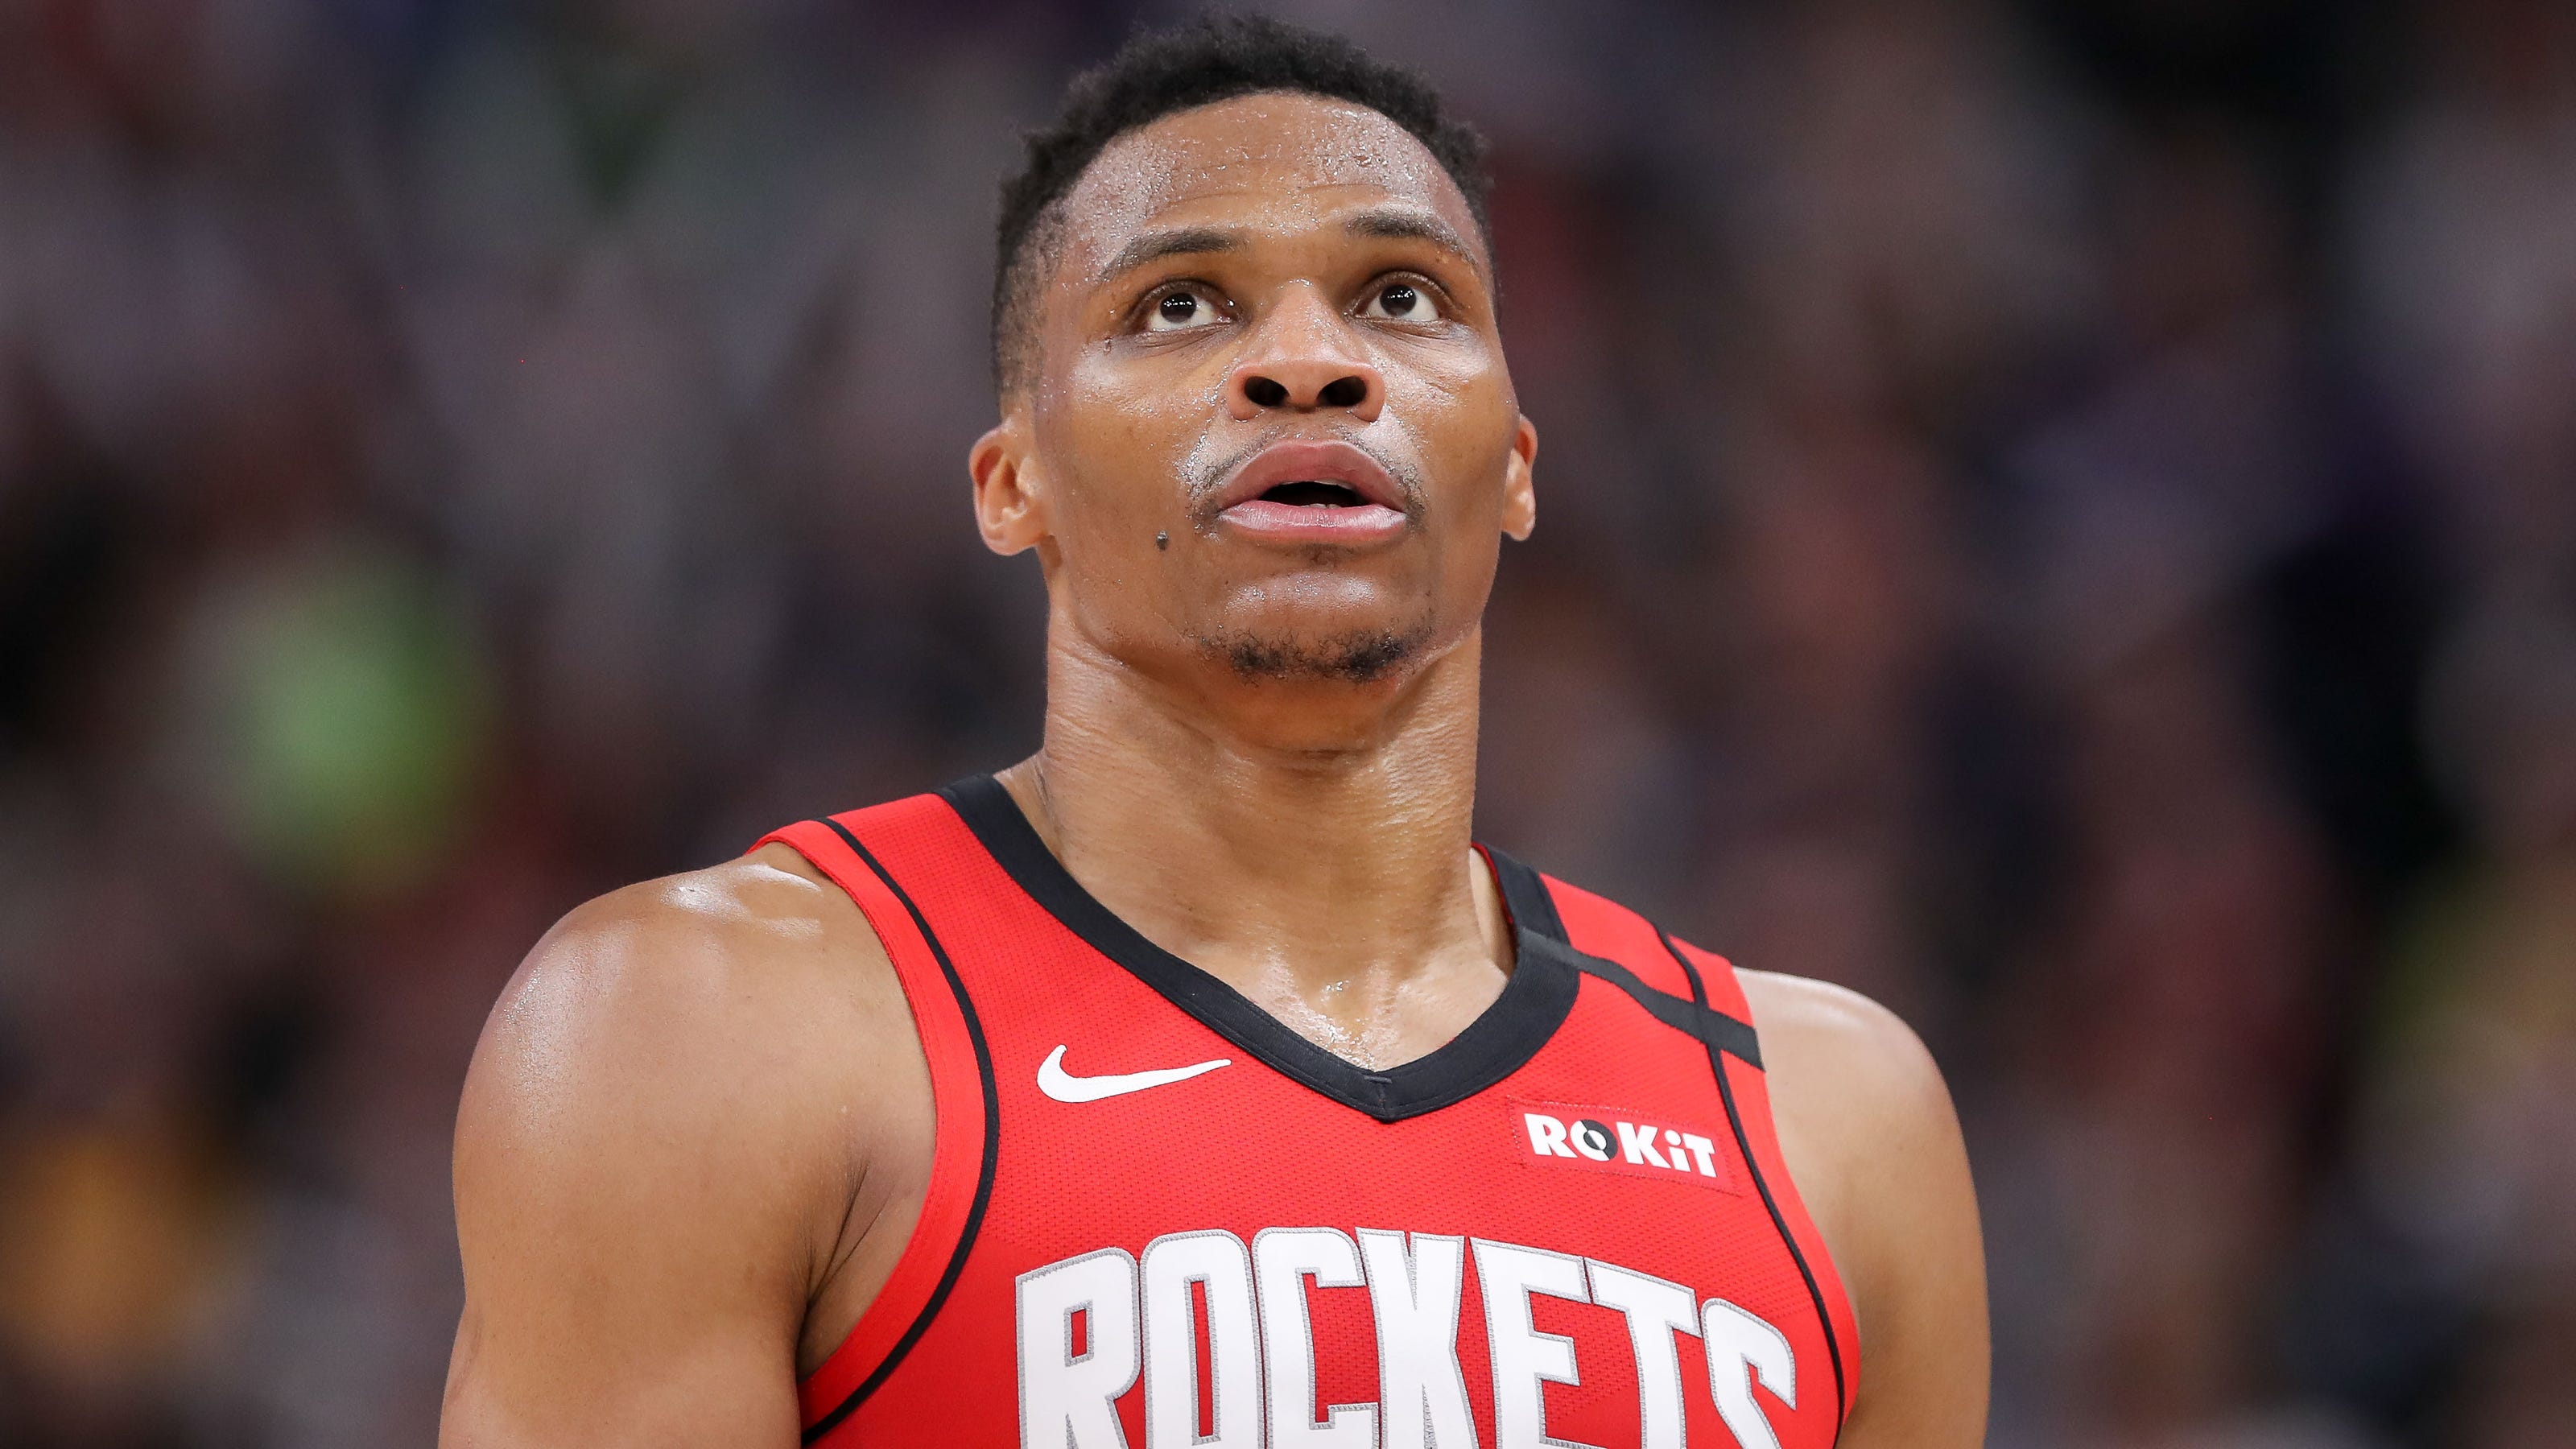 Rockets Russell Westbrook expected to join team 'soon'